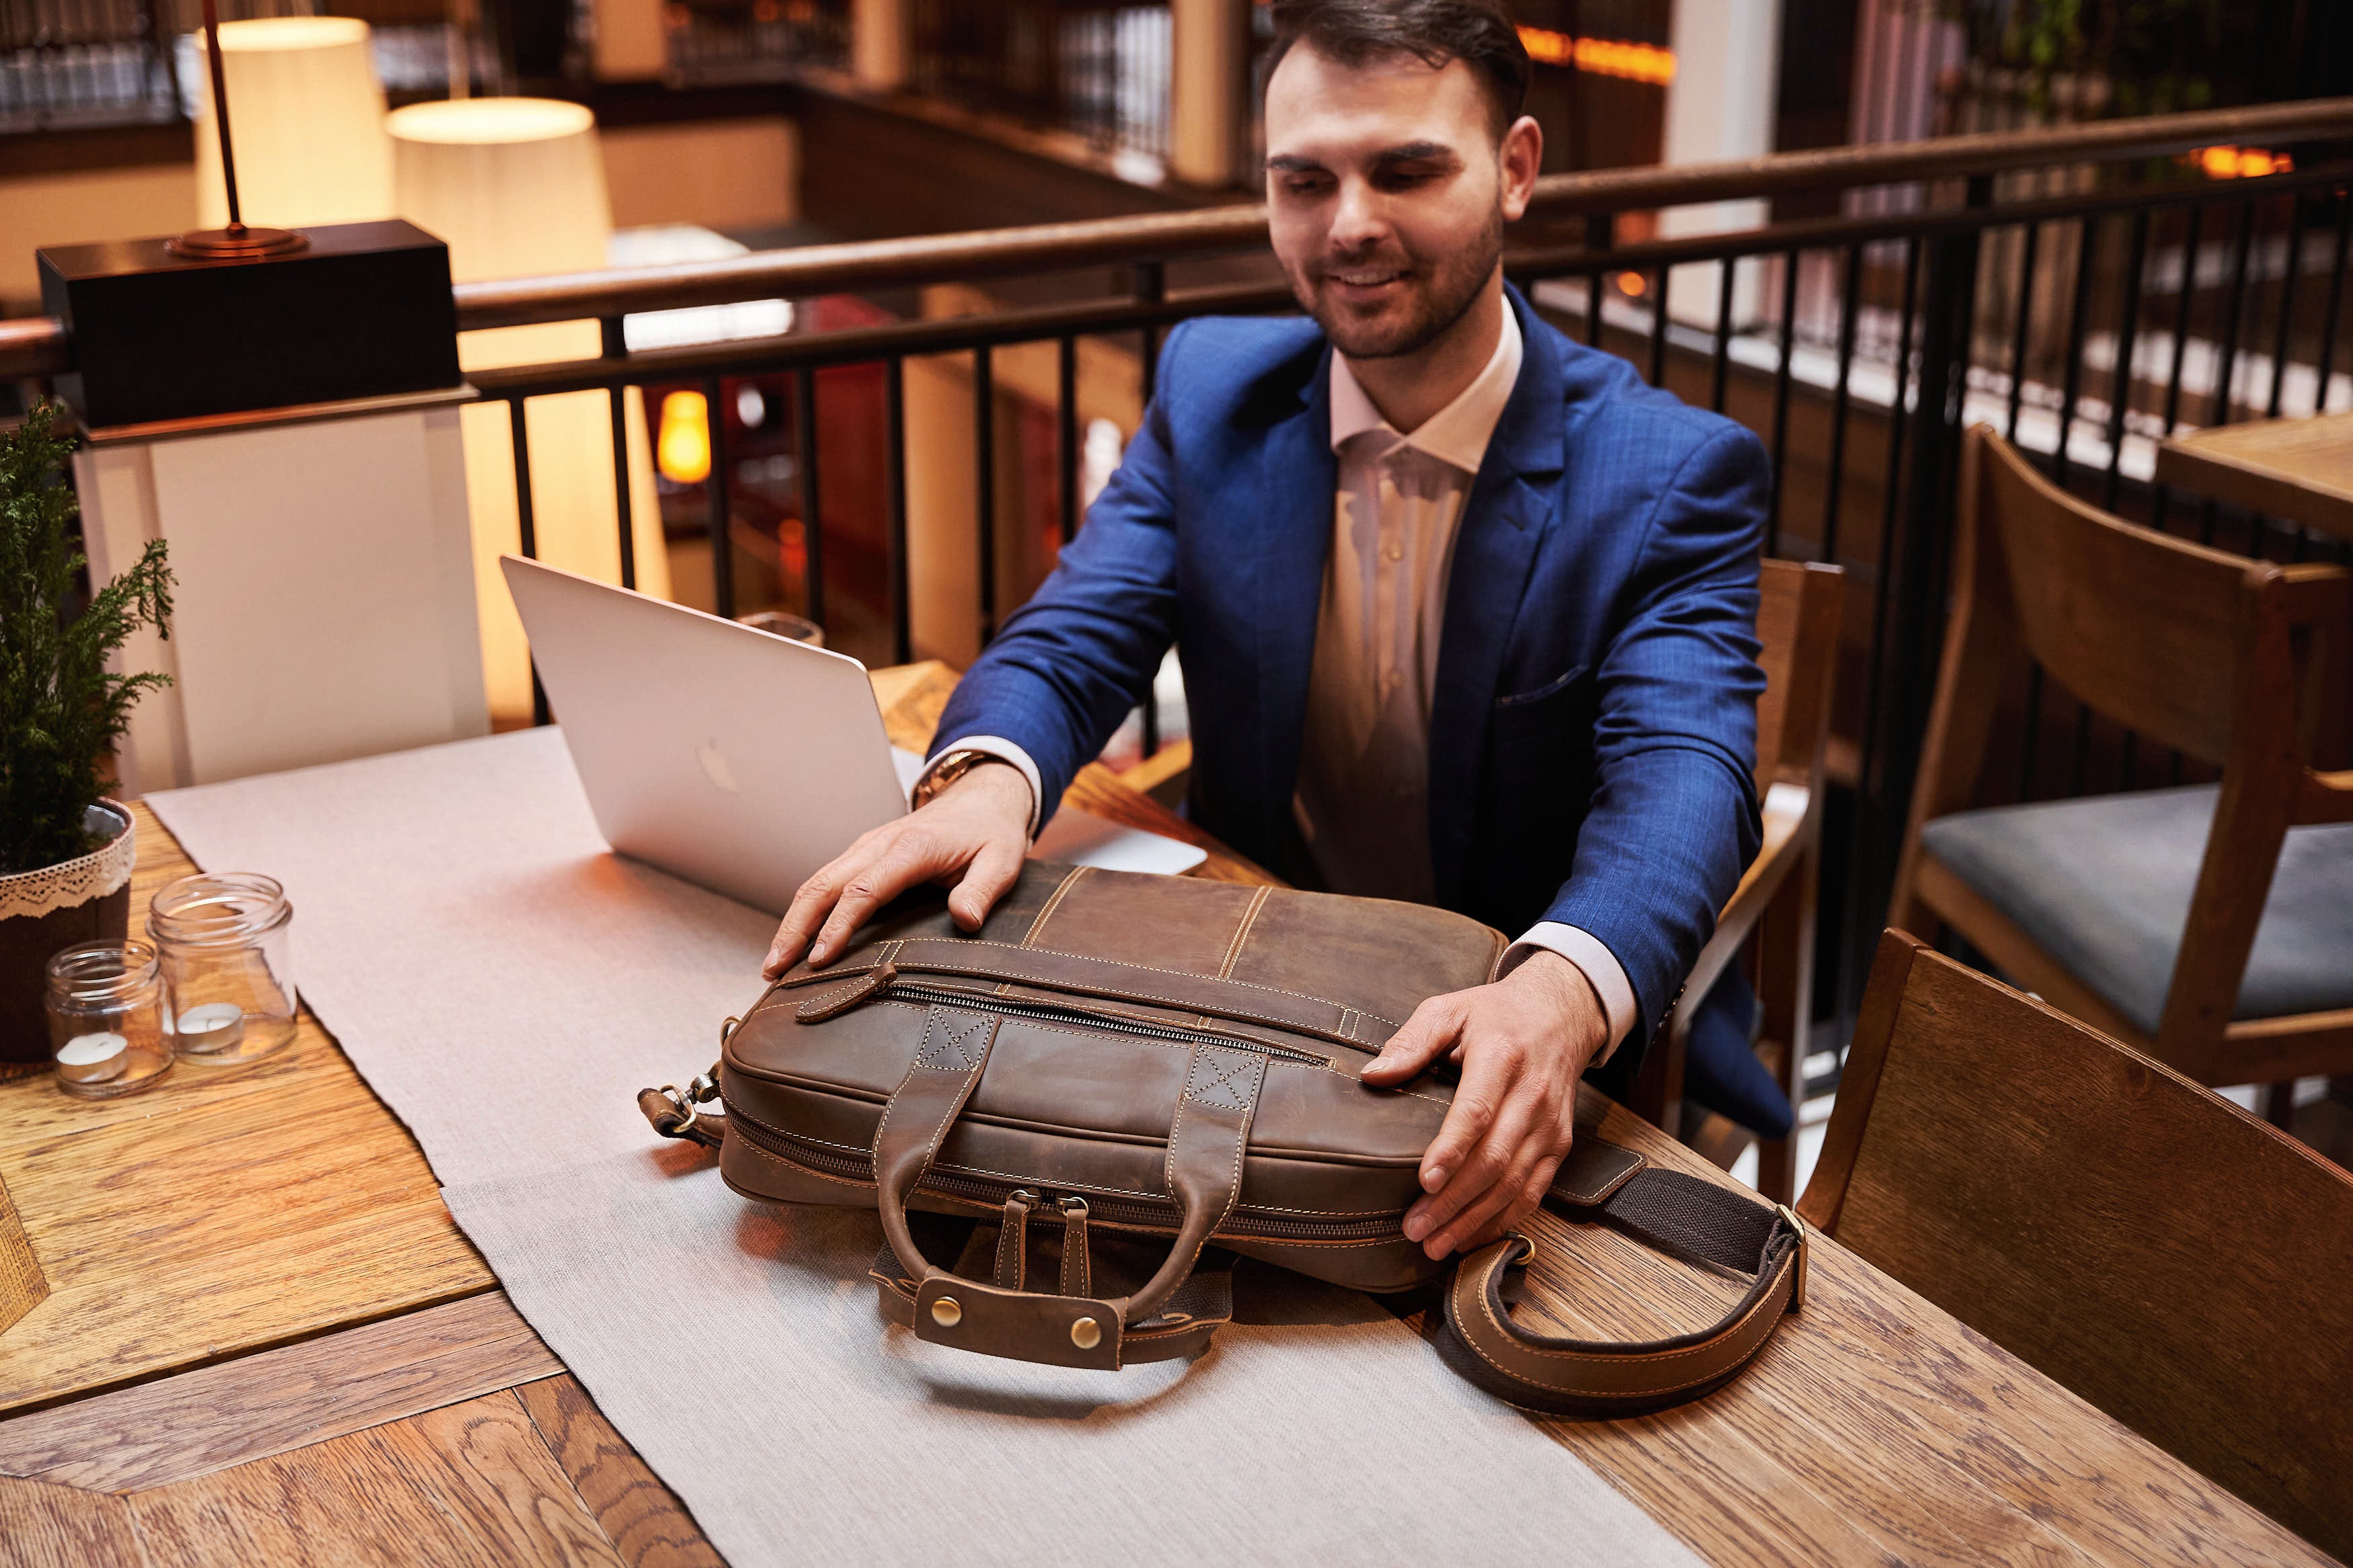 Luxorro Leather Briefcases for Men, Soft, Full Grain Leather Laptop Bag  for Men W/Hand Stitching That Will Last A Lifetime, Slim But Spacious